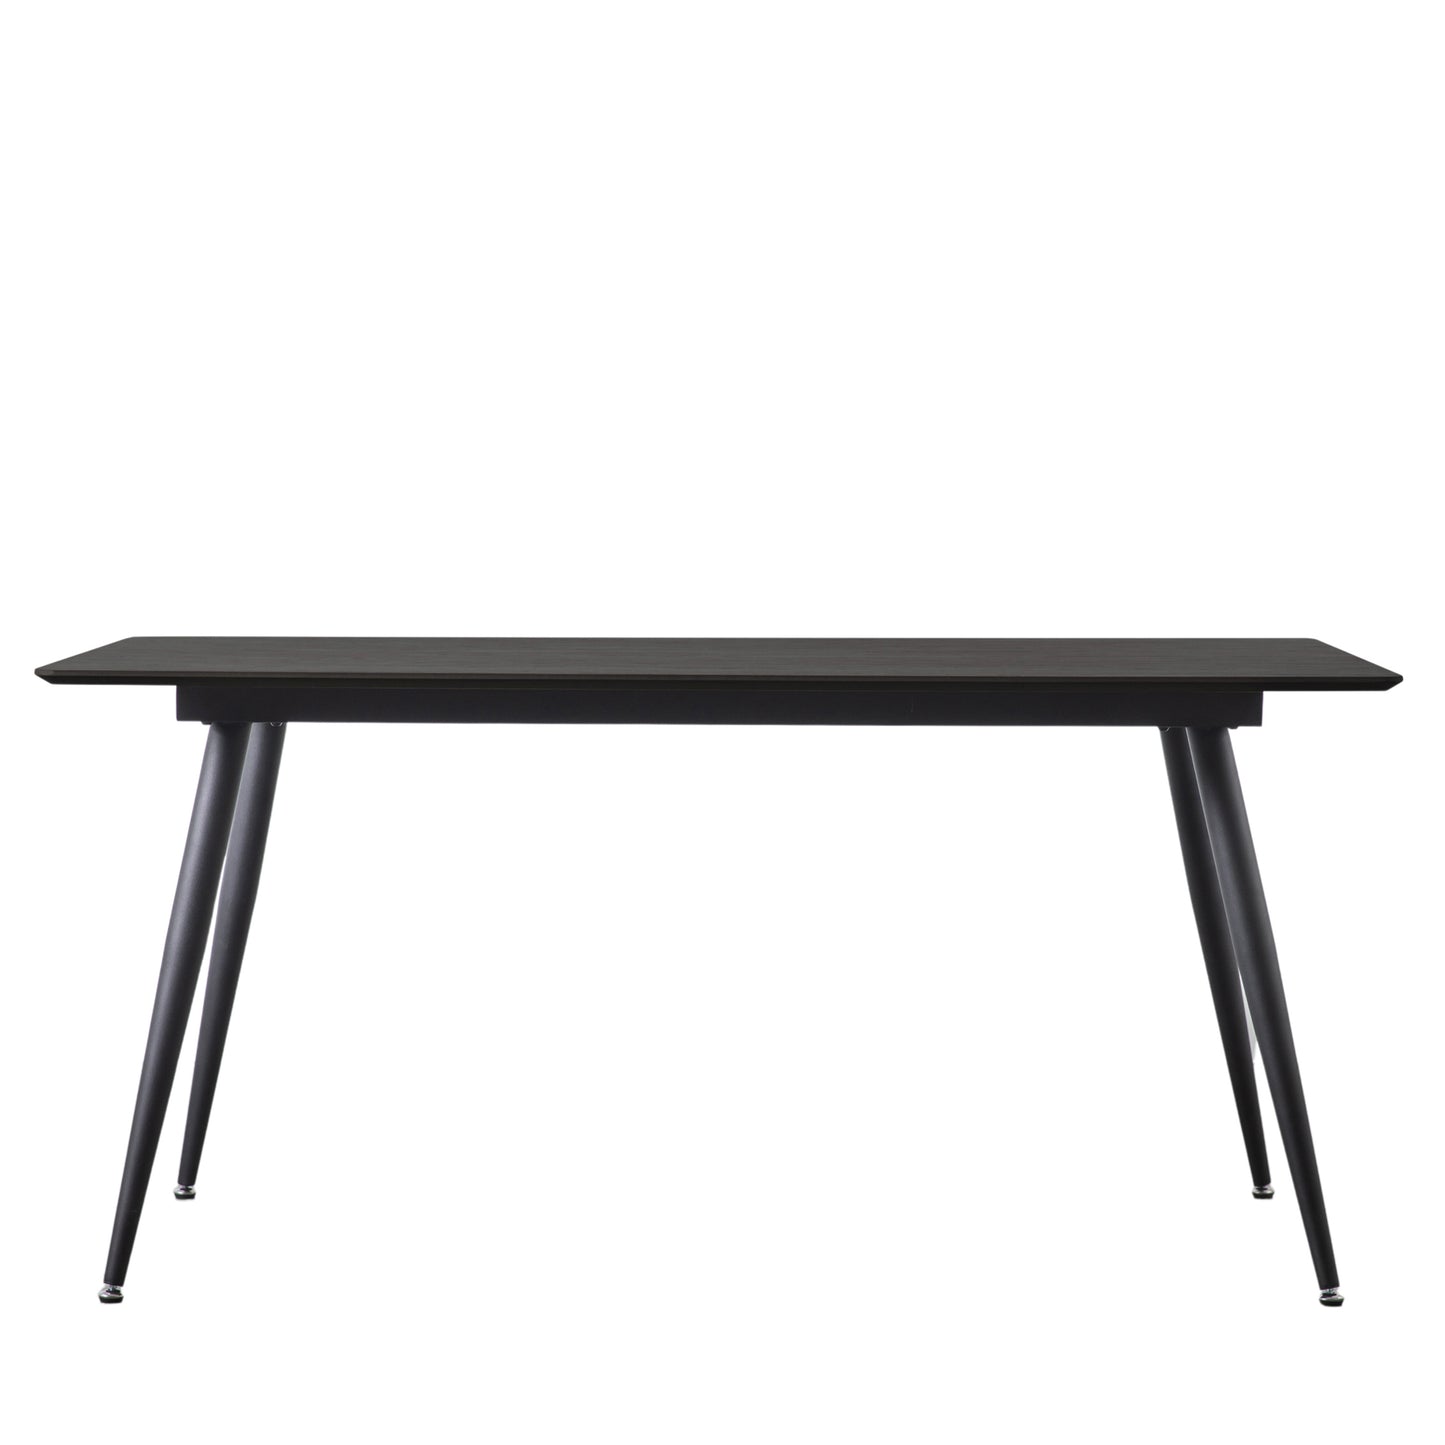 An Ashford Dining Table Black 1600x900x750mm with black legs for interior decor from Kikiathome.co.uk.